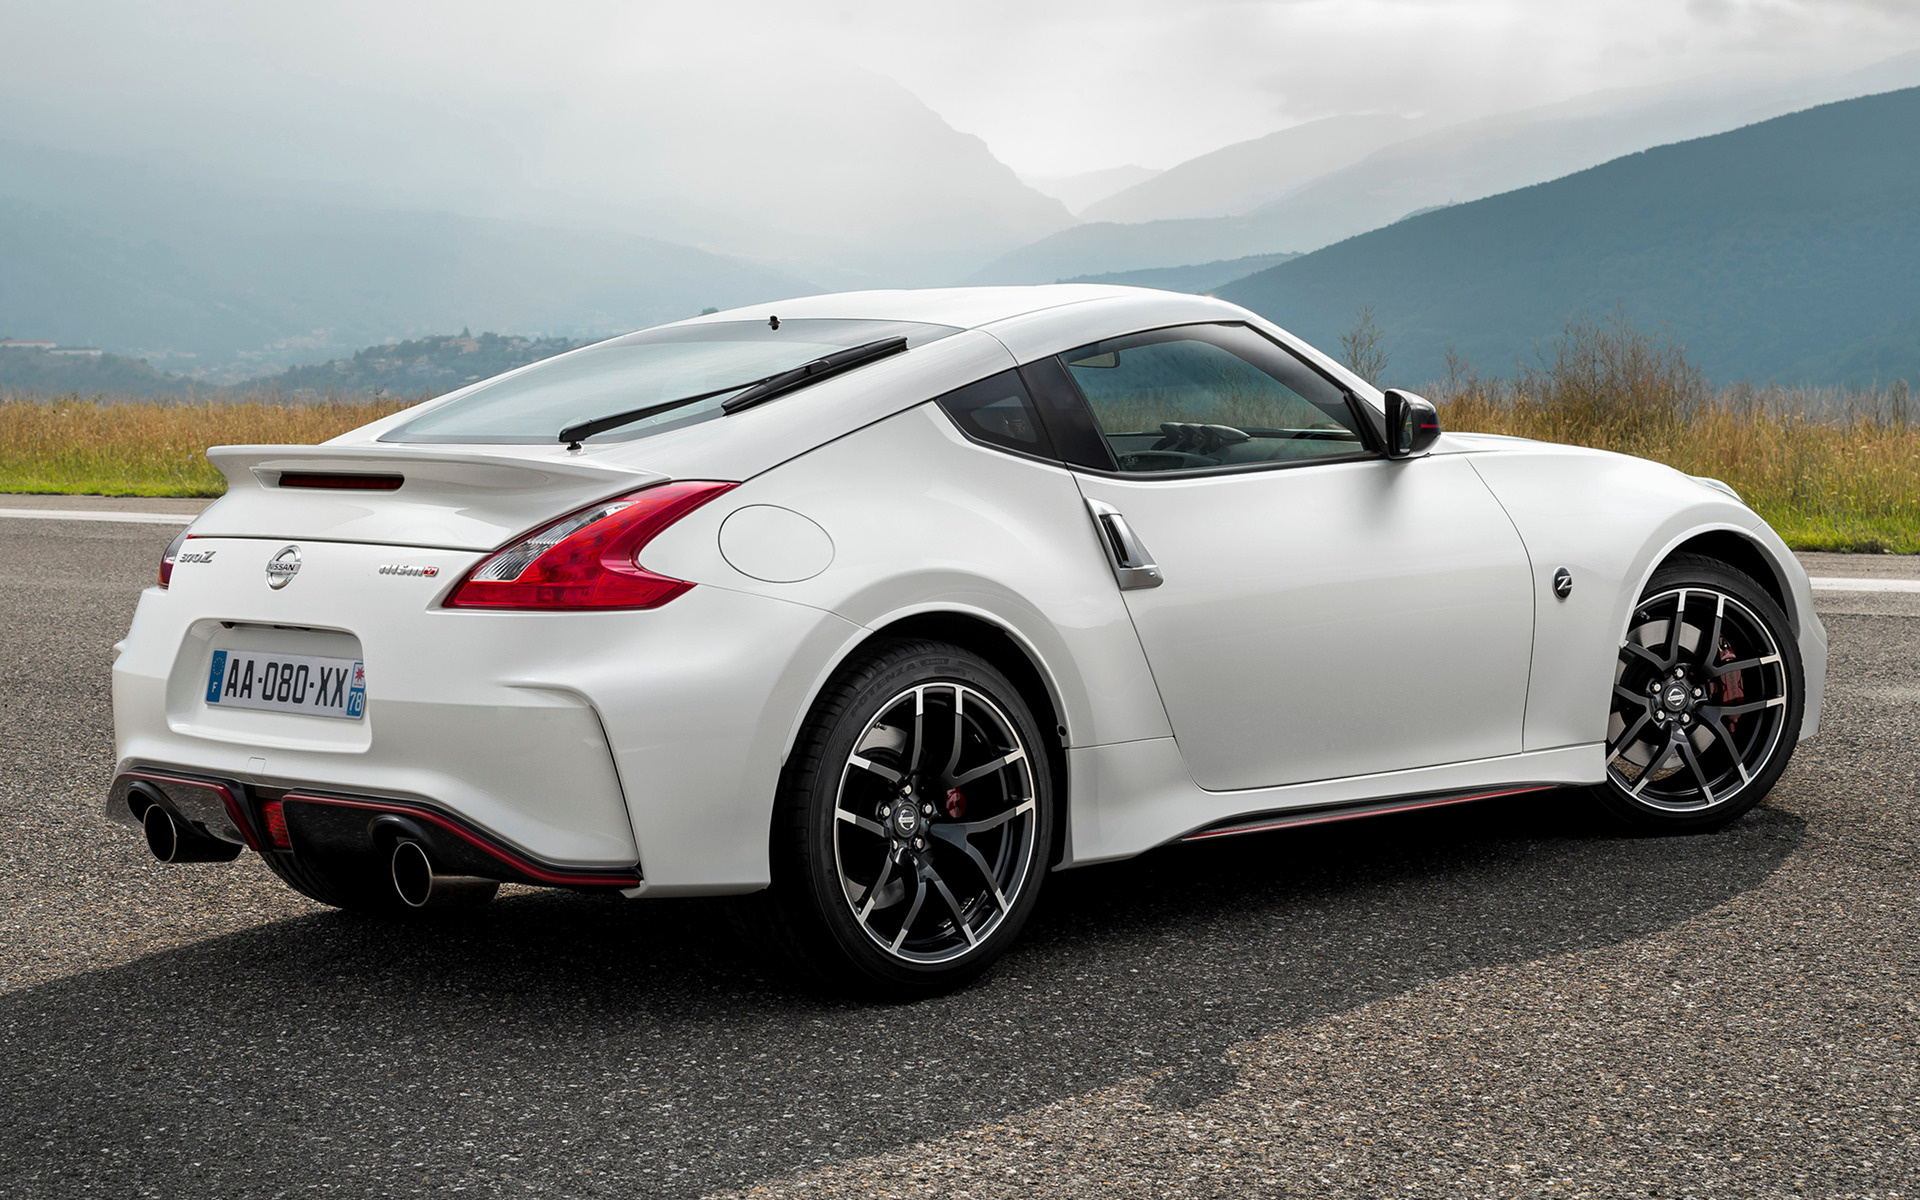 Nissan 370Z Nismo 2014 Wallpapers and HD Images   Car Pixel 1920x1200